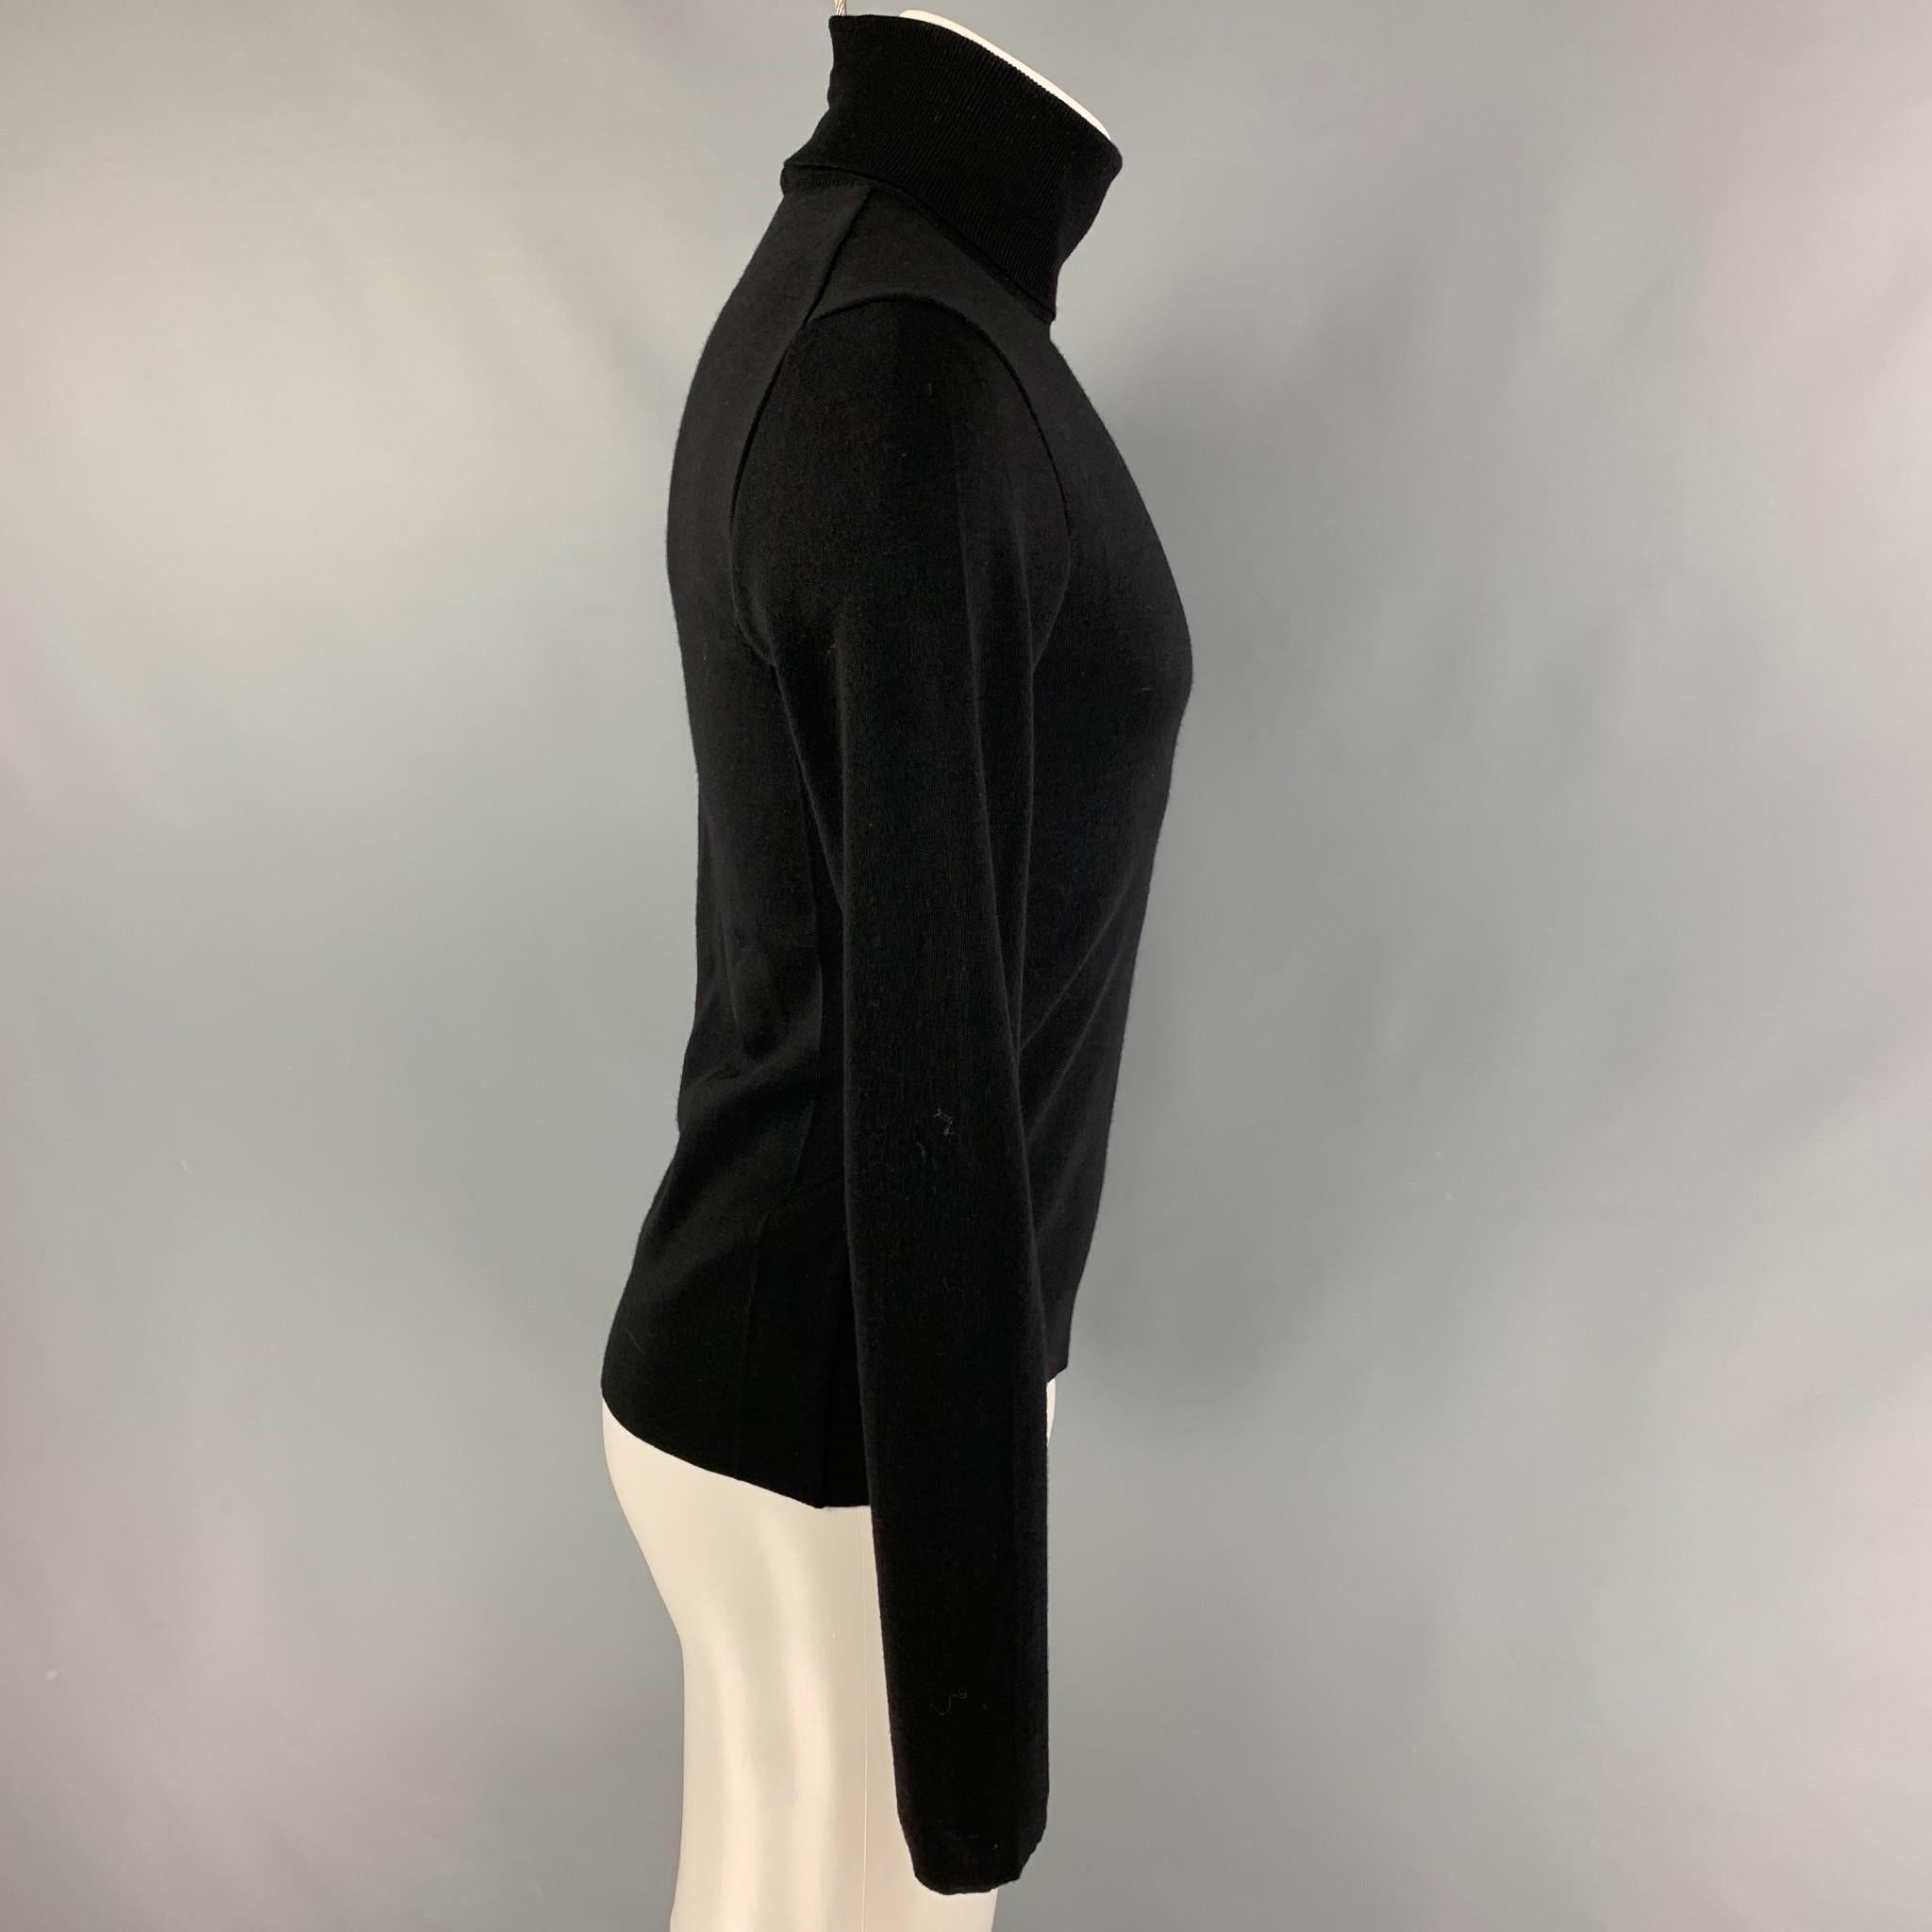 JIL SANDER pullover comes in a black wool featuring a turtleneck. Made in Italy. 

Very Good Pre-Owned Condition.
Marked: 46

Measurements:

Shoulder: 16.5 in.
Chest: 38 in.
Sleeve: 27.5 in.
Length: 25.5 in. 